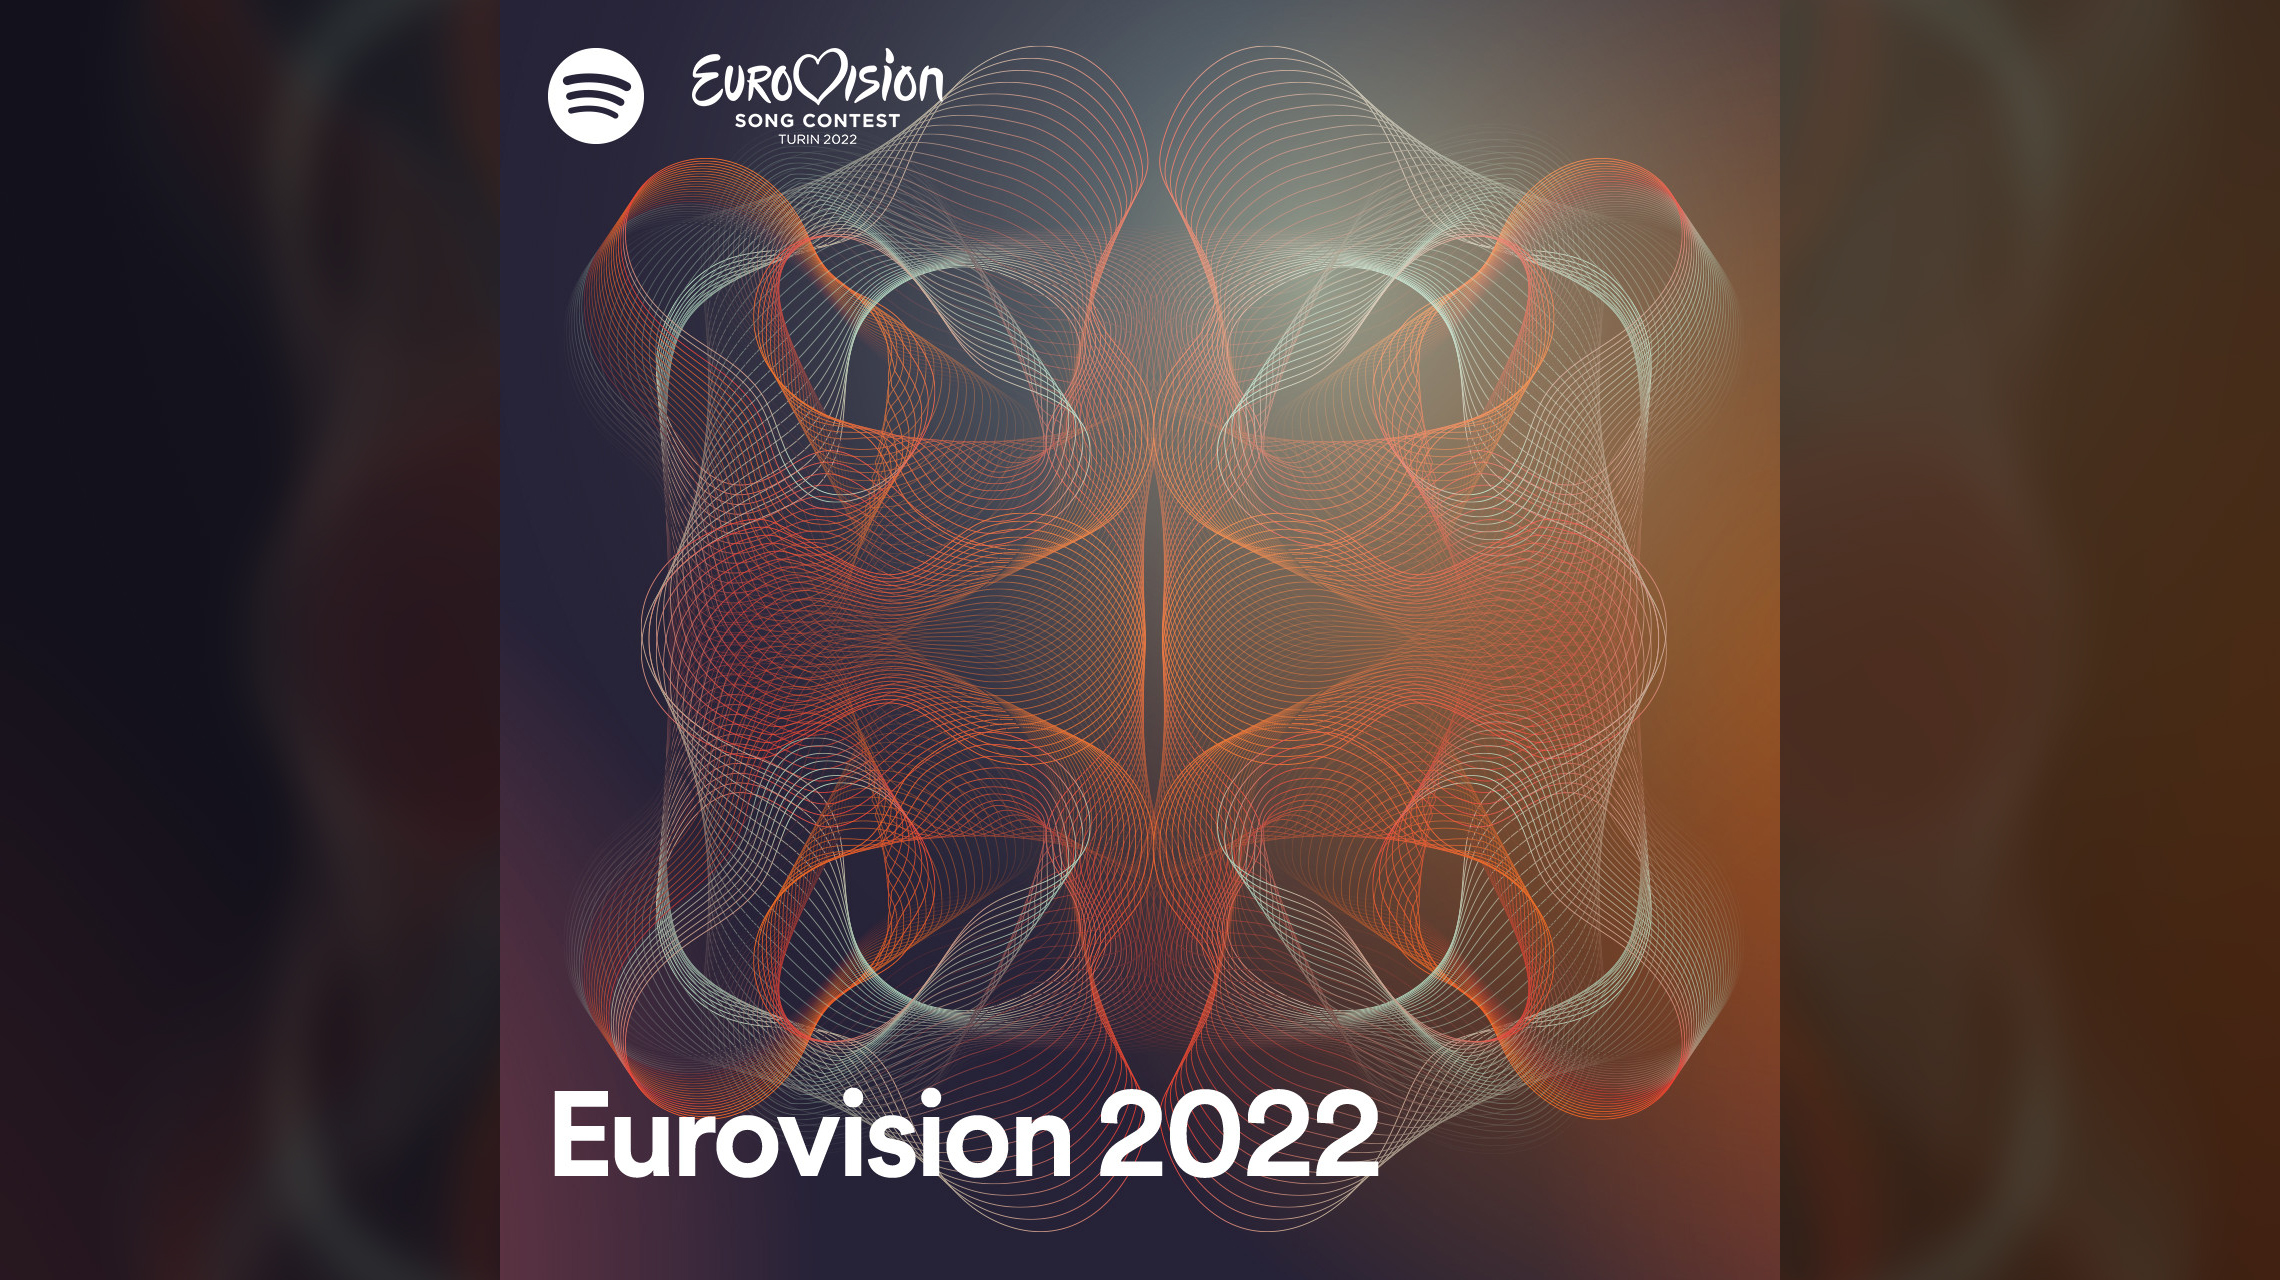 Spotify predict the top 3 Eurovision 2022 songs